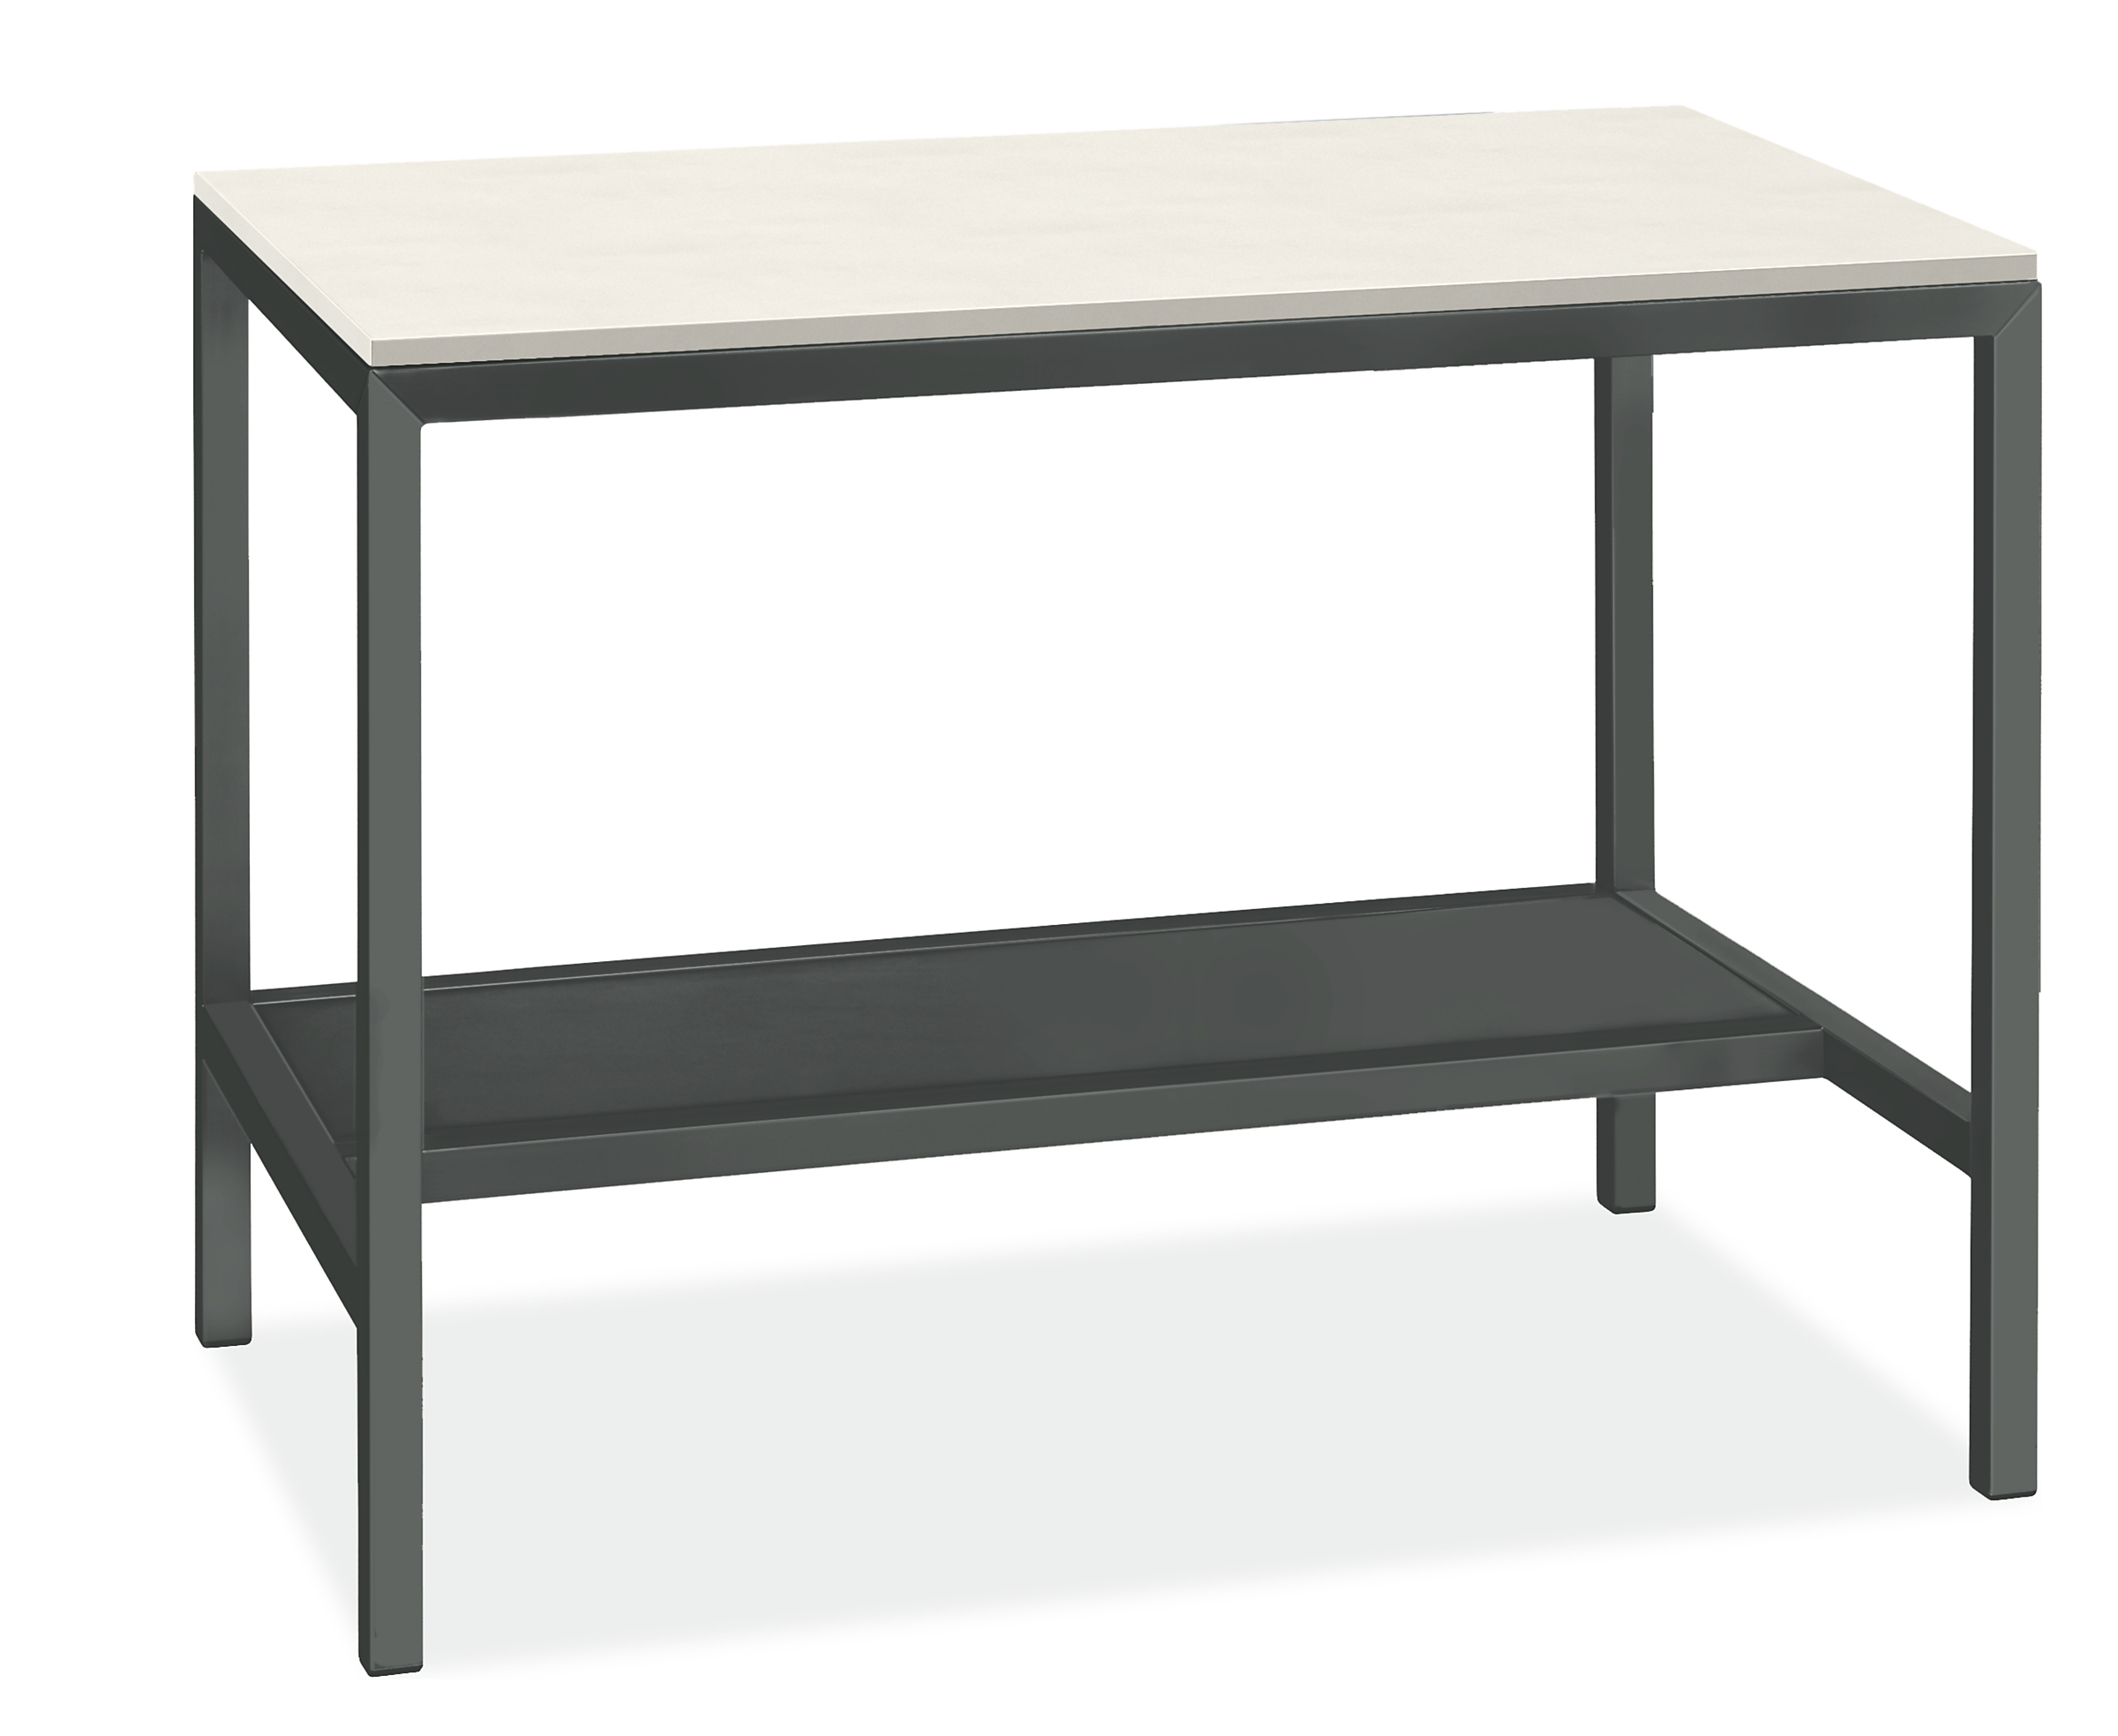 Parsons 48w 30d 35h Narrow Shelf Counter Table with 1.5" Leg